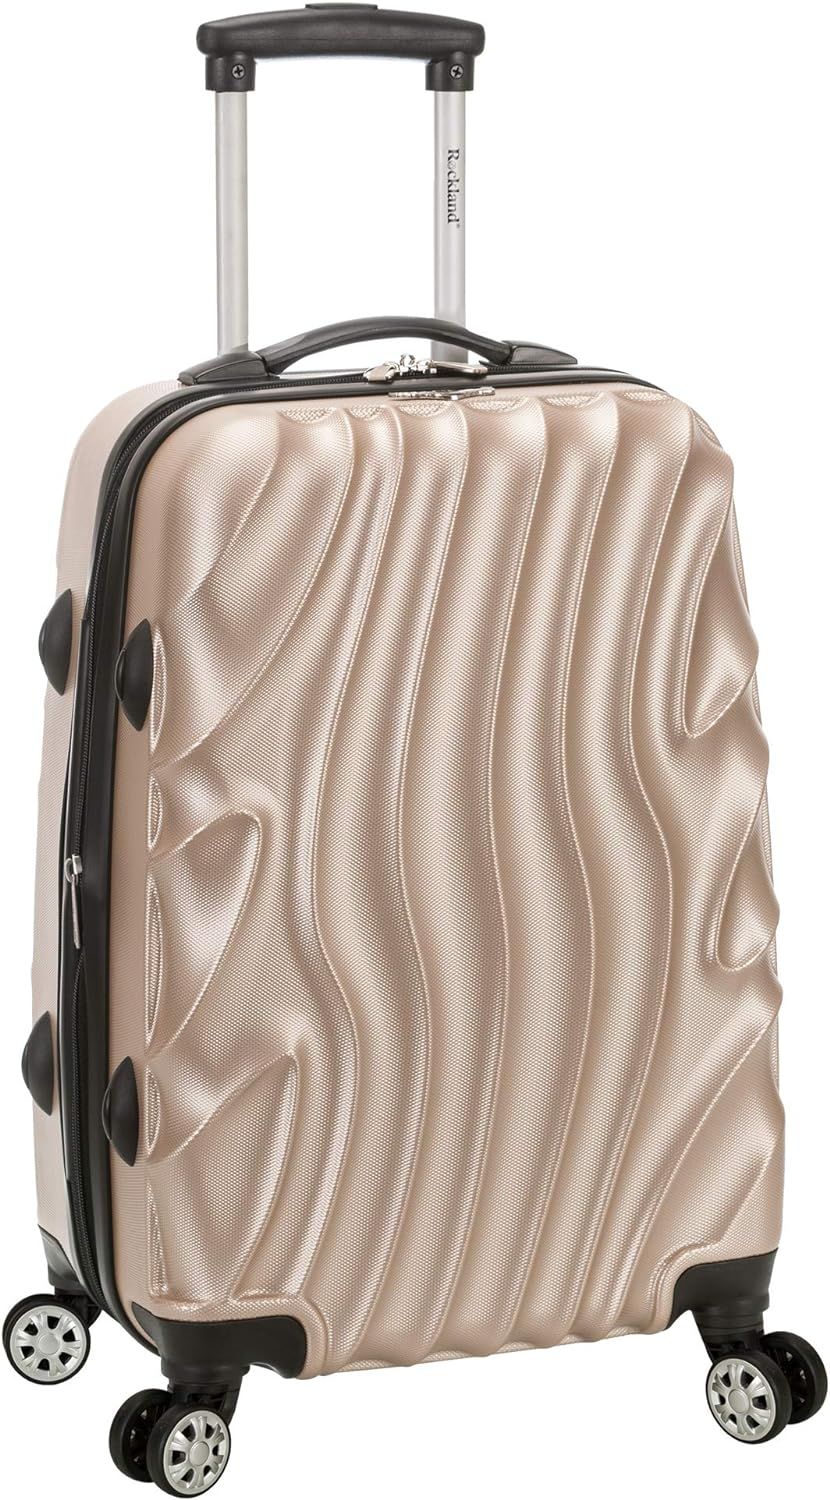 Rockland Melbourne Hardside Expandable Spinner Wheel Luggage, Gold Wave, Carry-On 20-Inch | Amazon (US)